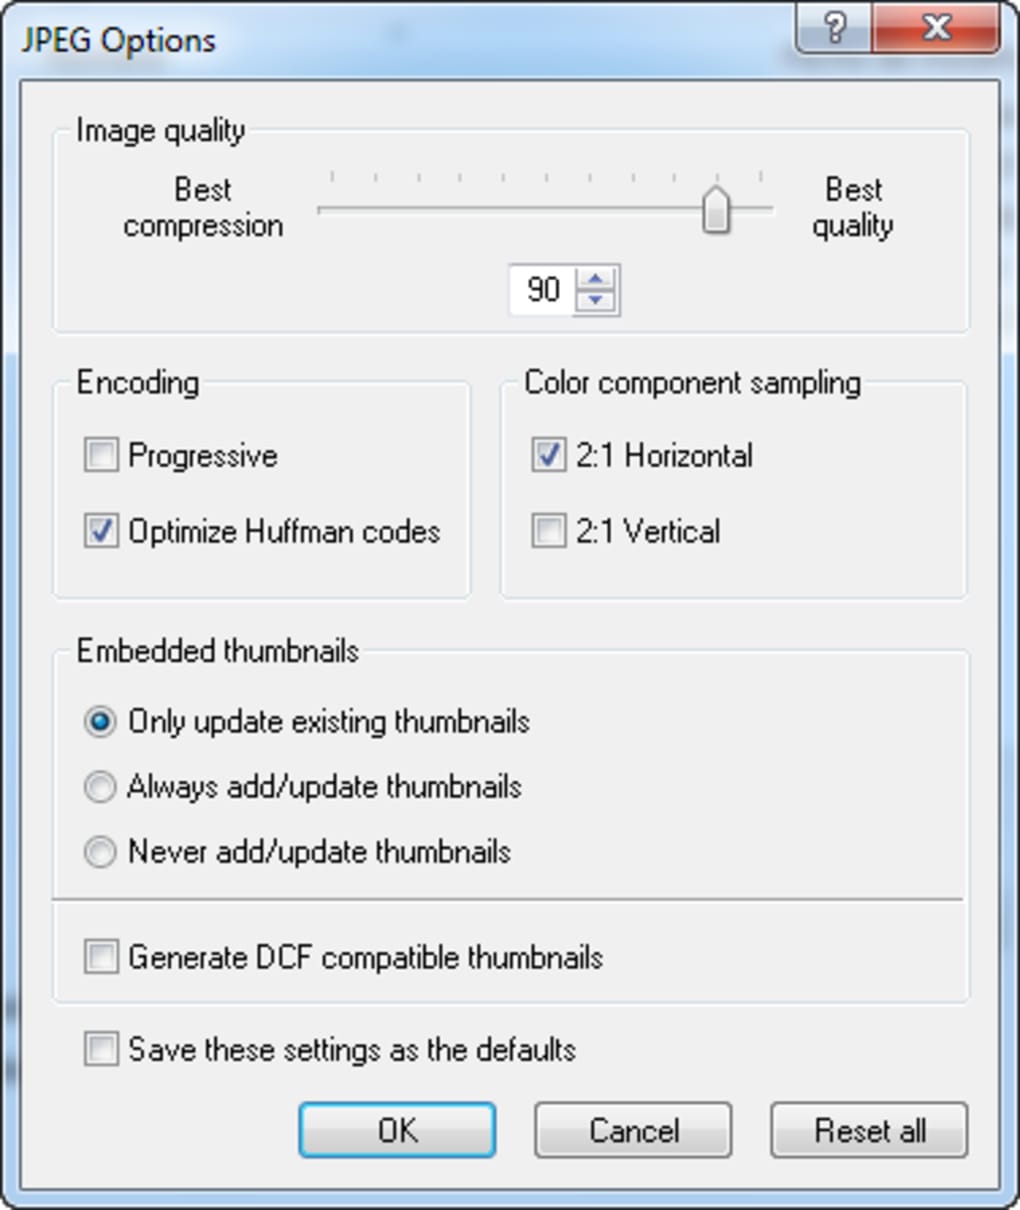 download acdsee 18